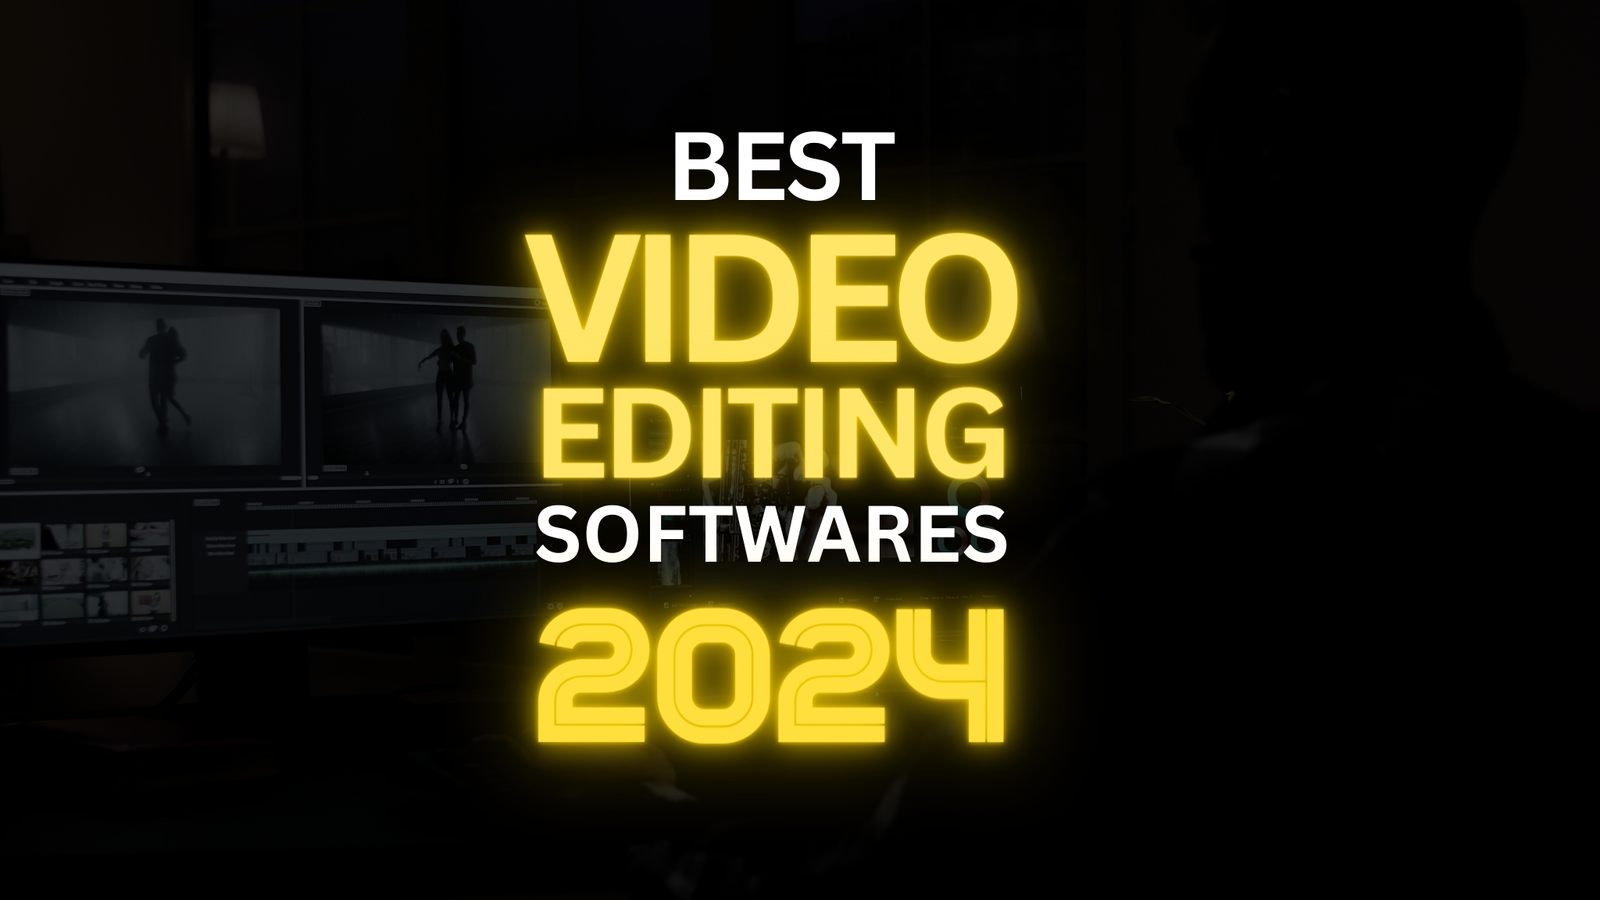 Top 5 Video Editing Software in 2024